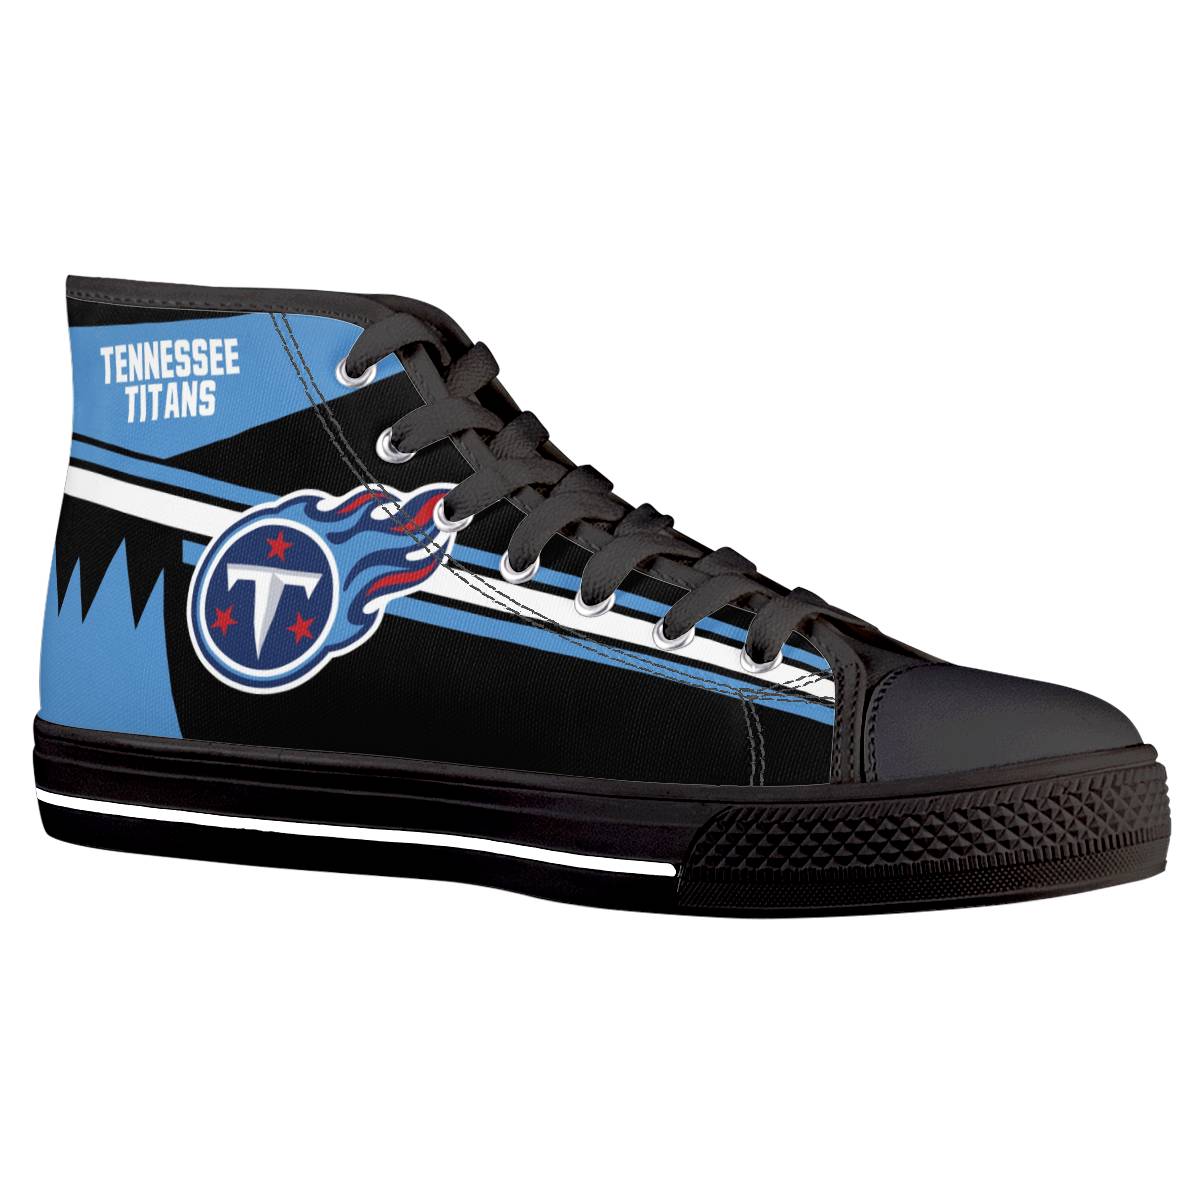 Men's Tennessee Titans High Top Canvas Sneakers 002